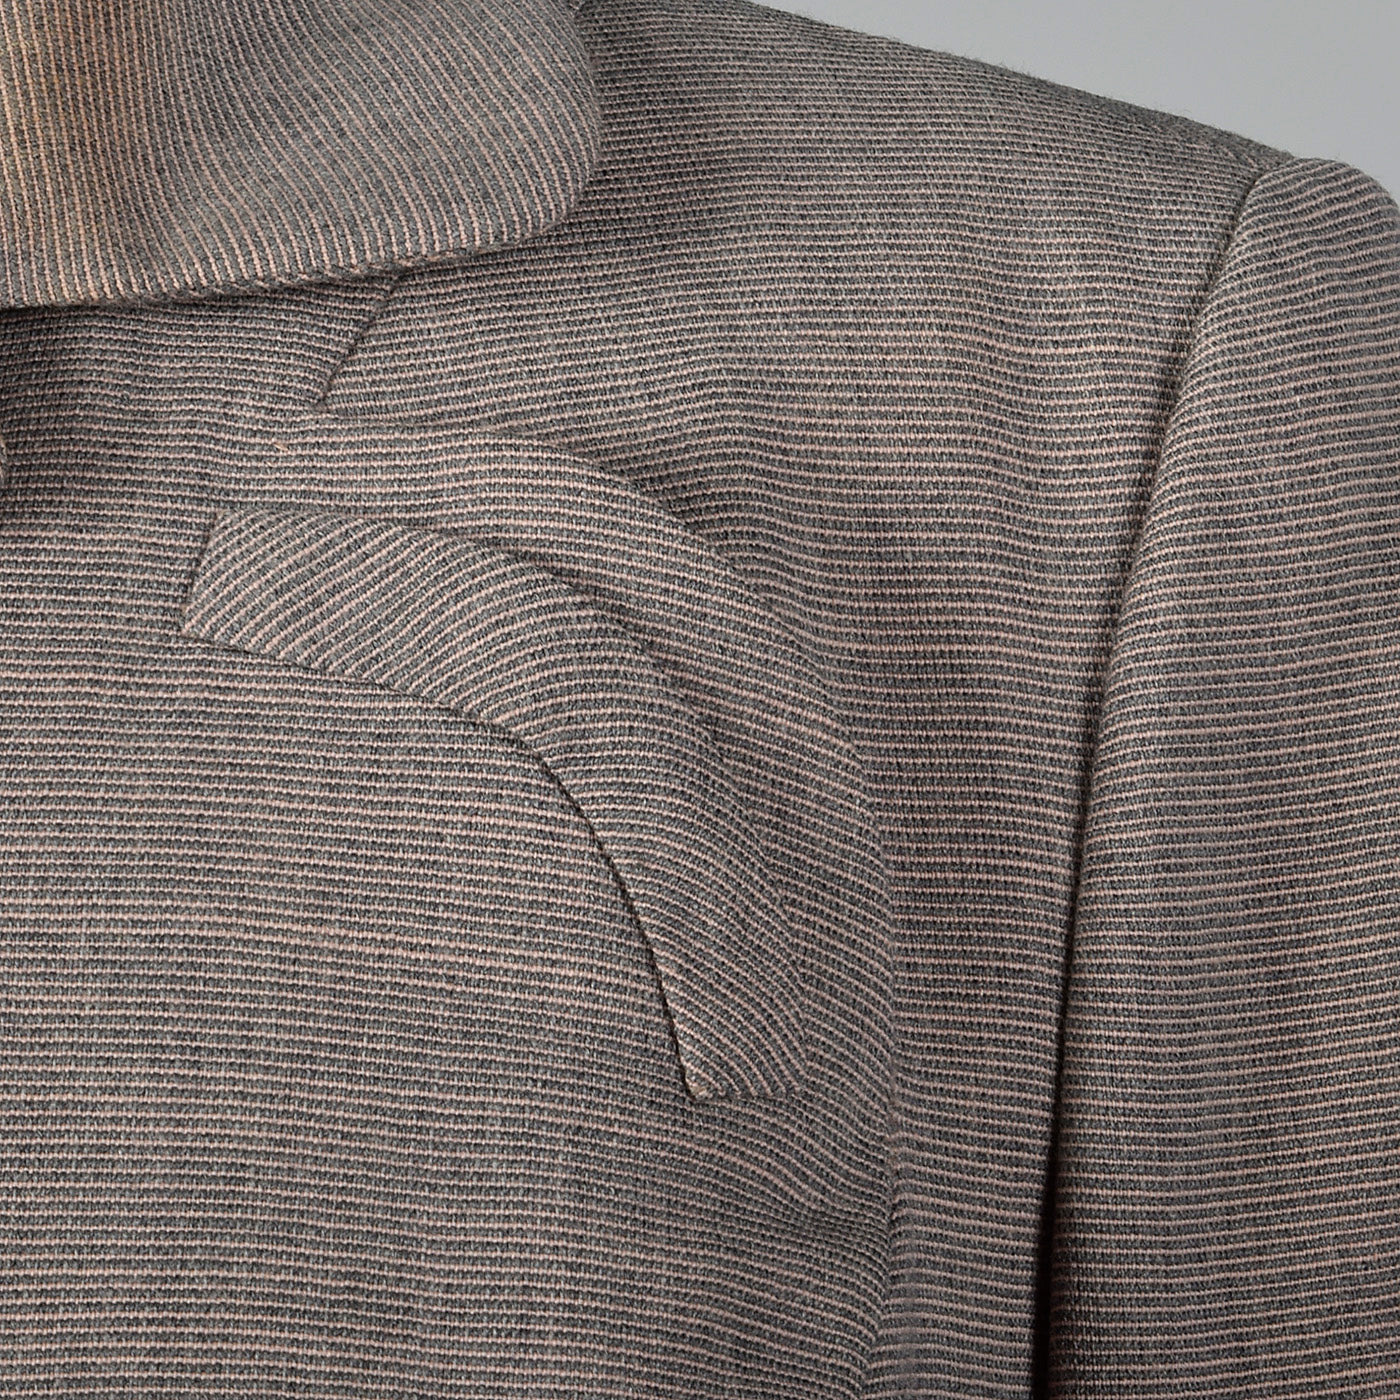 1950s Fitted Blazer in Pink and Gray Stripe